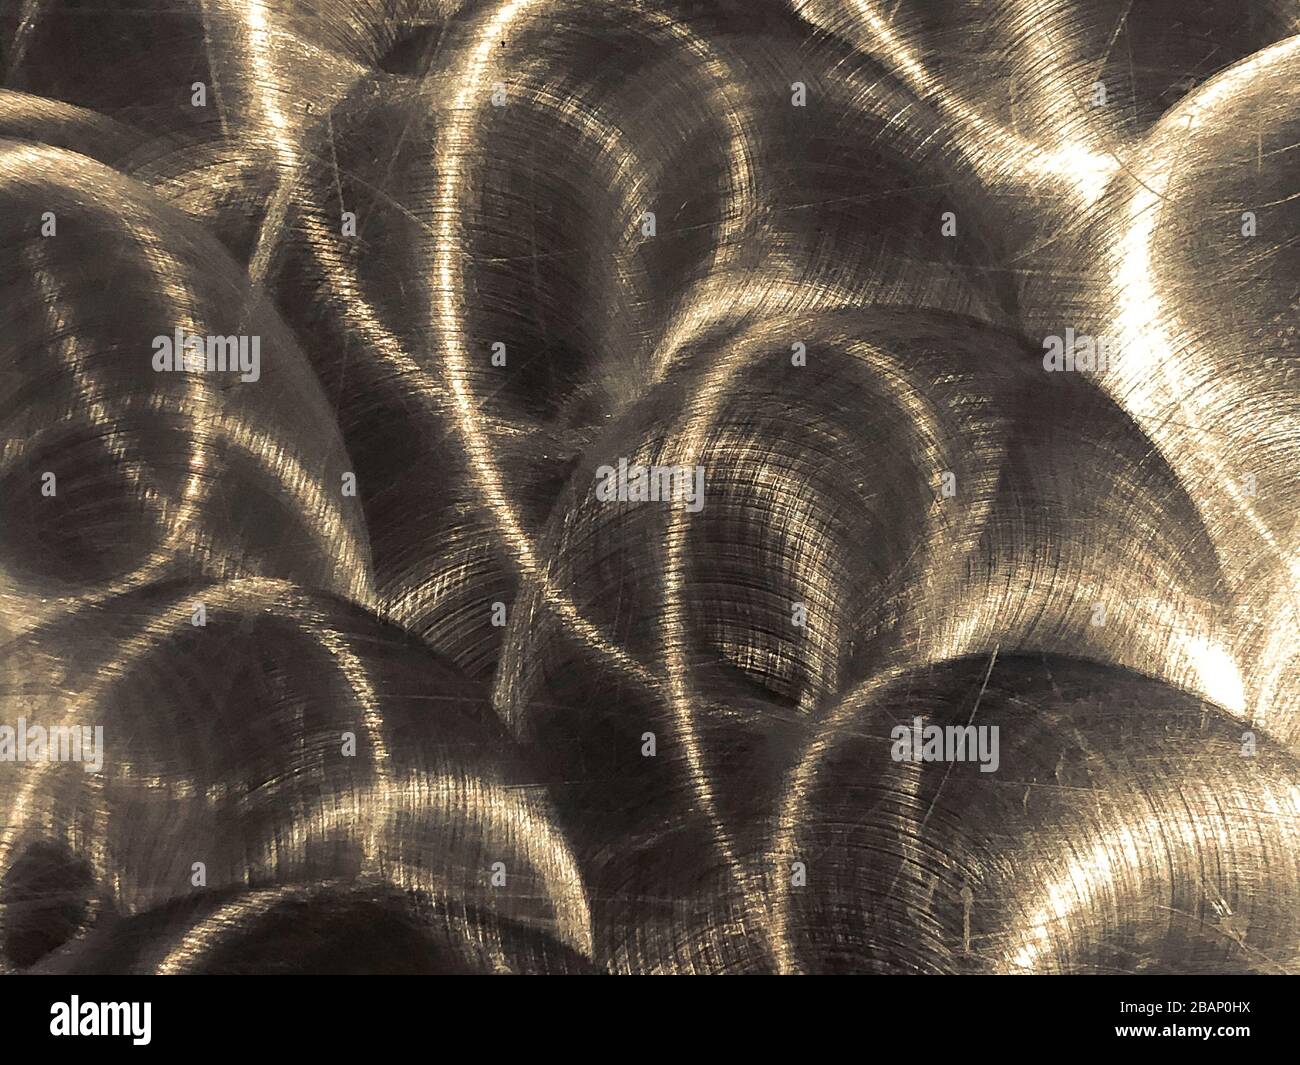 Close up of grungy, industrial brushed metal sheet with circular patterns Stock Photo